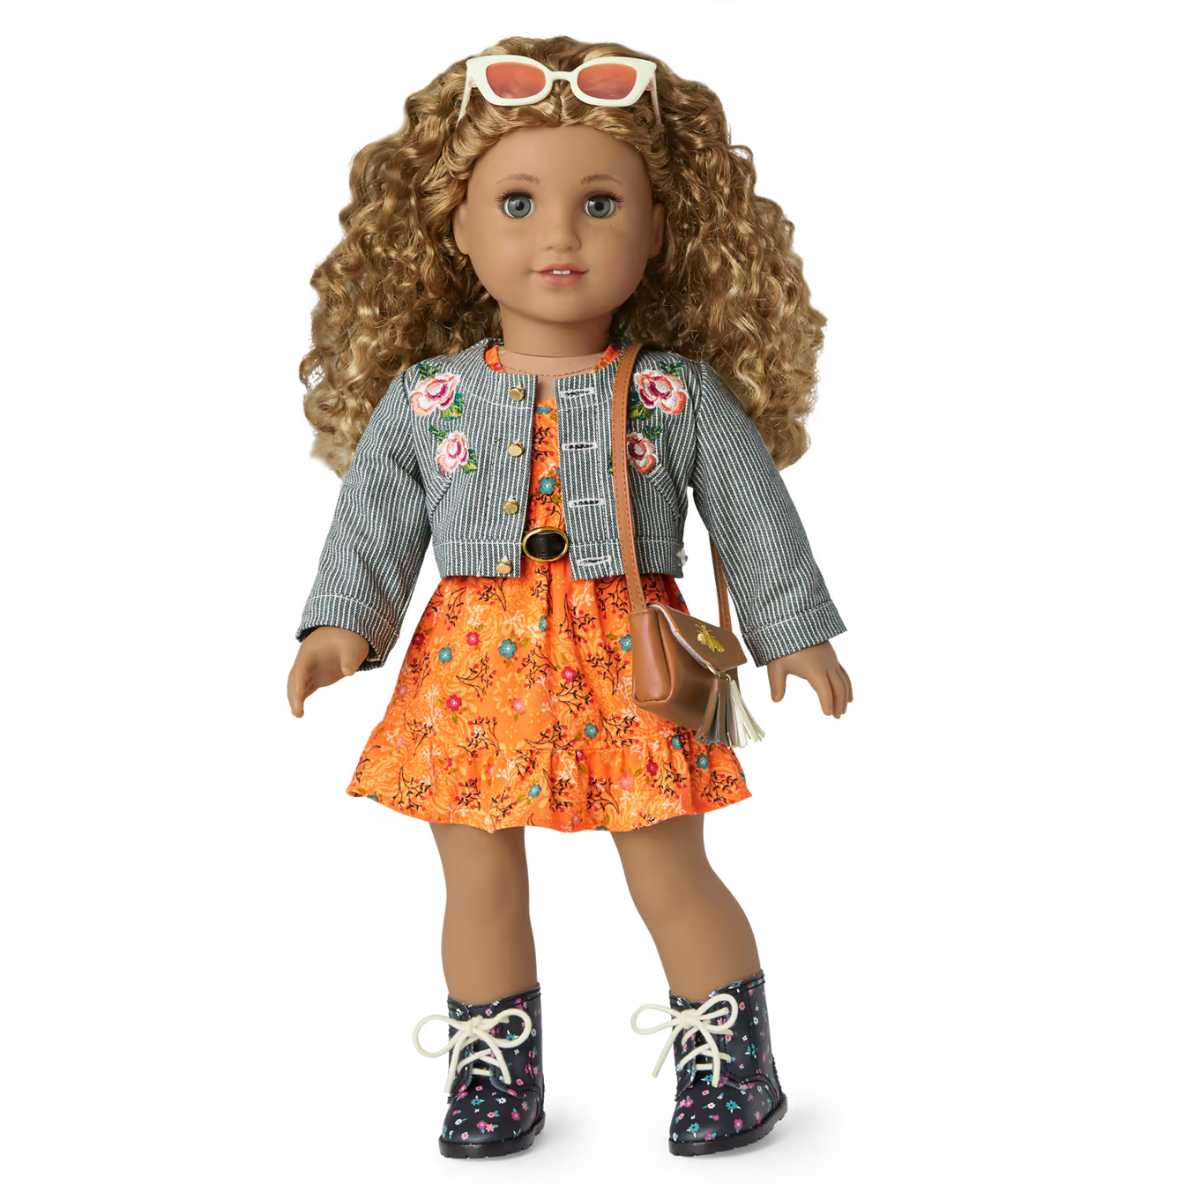 Buy Online American Girl Dolls, Outfits, Accessories - UK, France